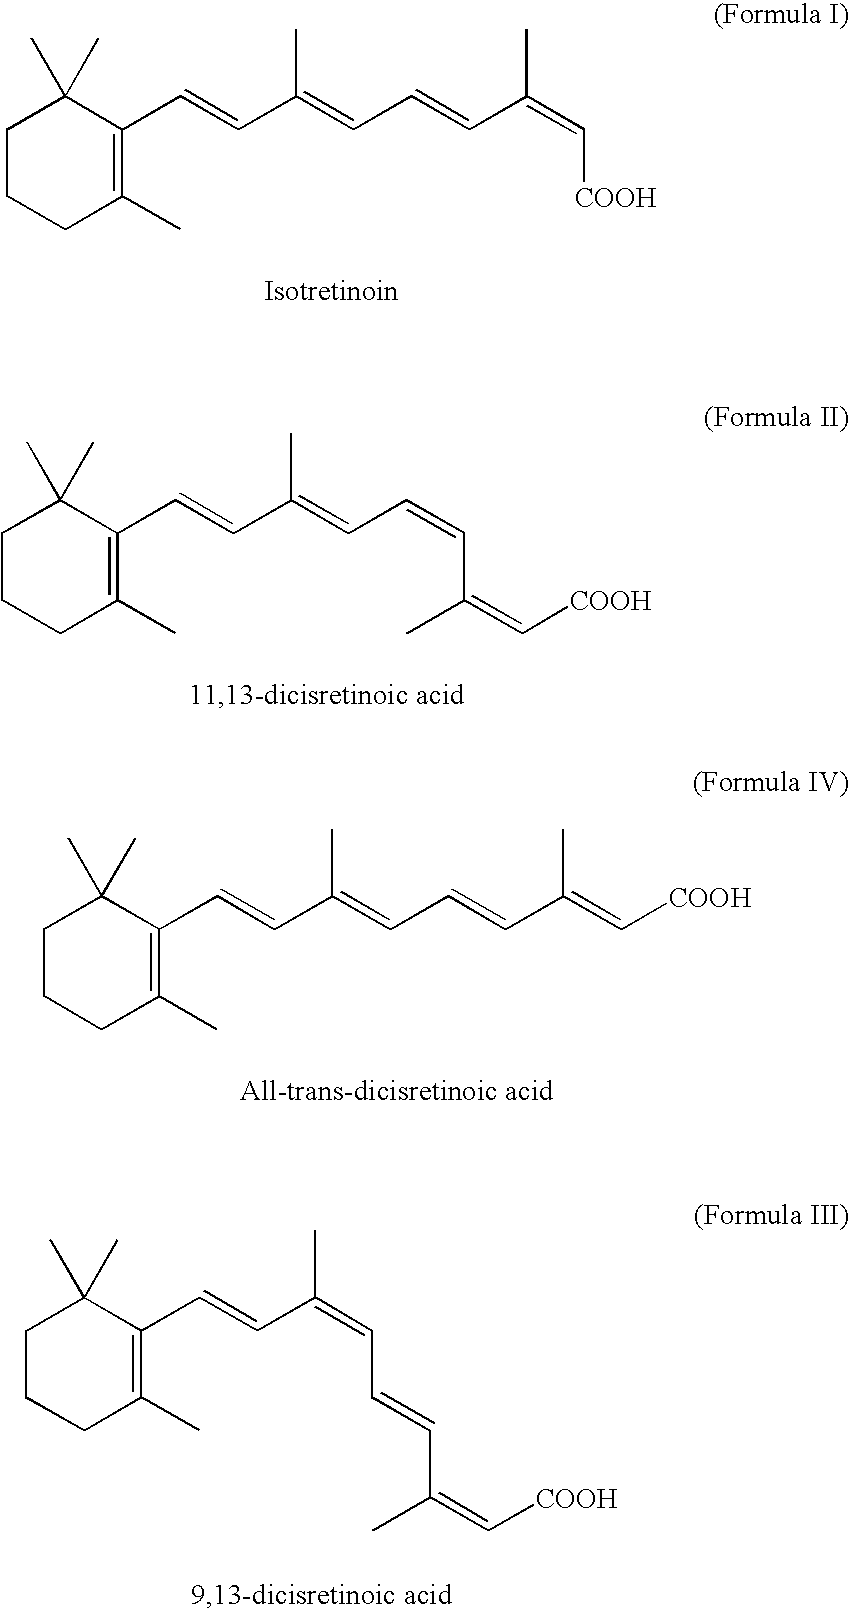 Process for preparation of highly pure isotretinoin